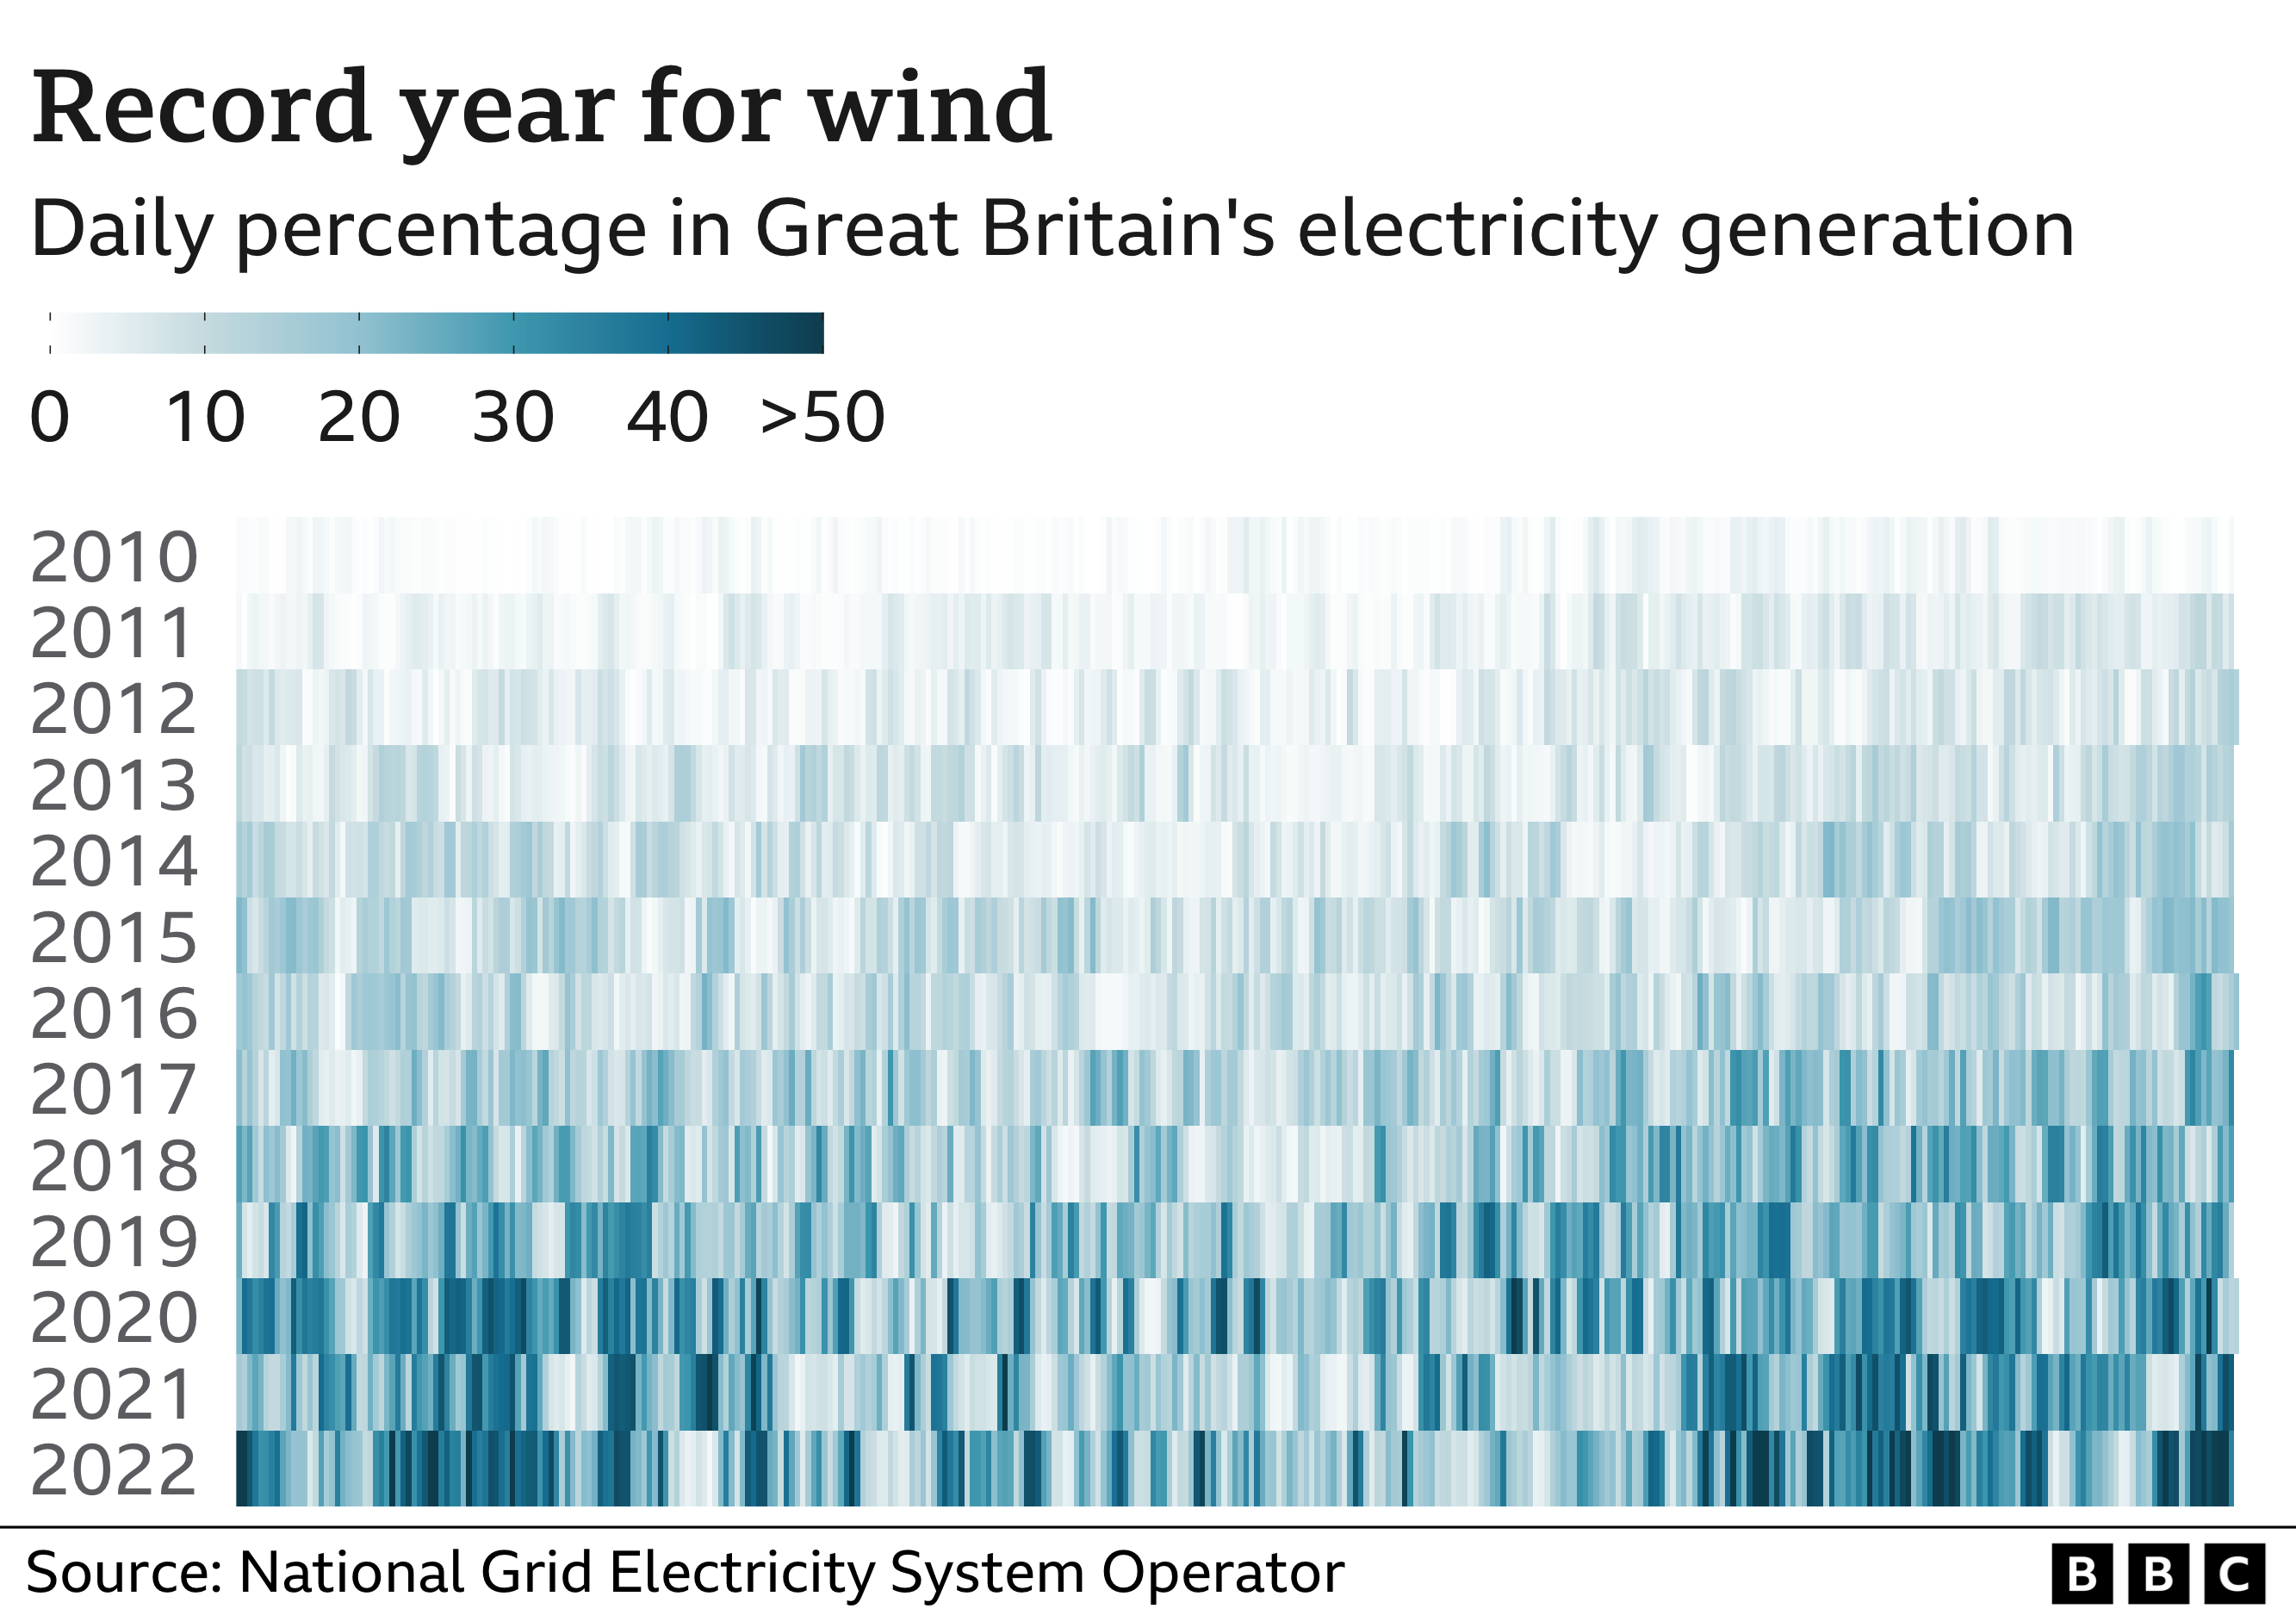 Wind power has been increasing in Great Britain since 2010